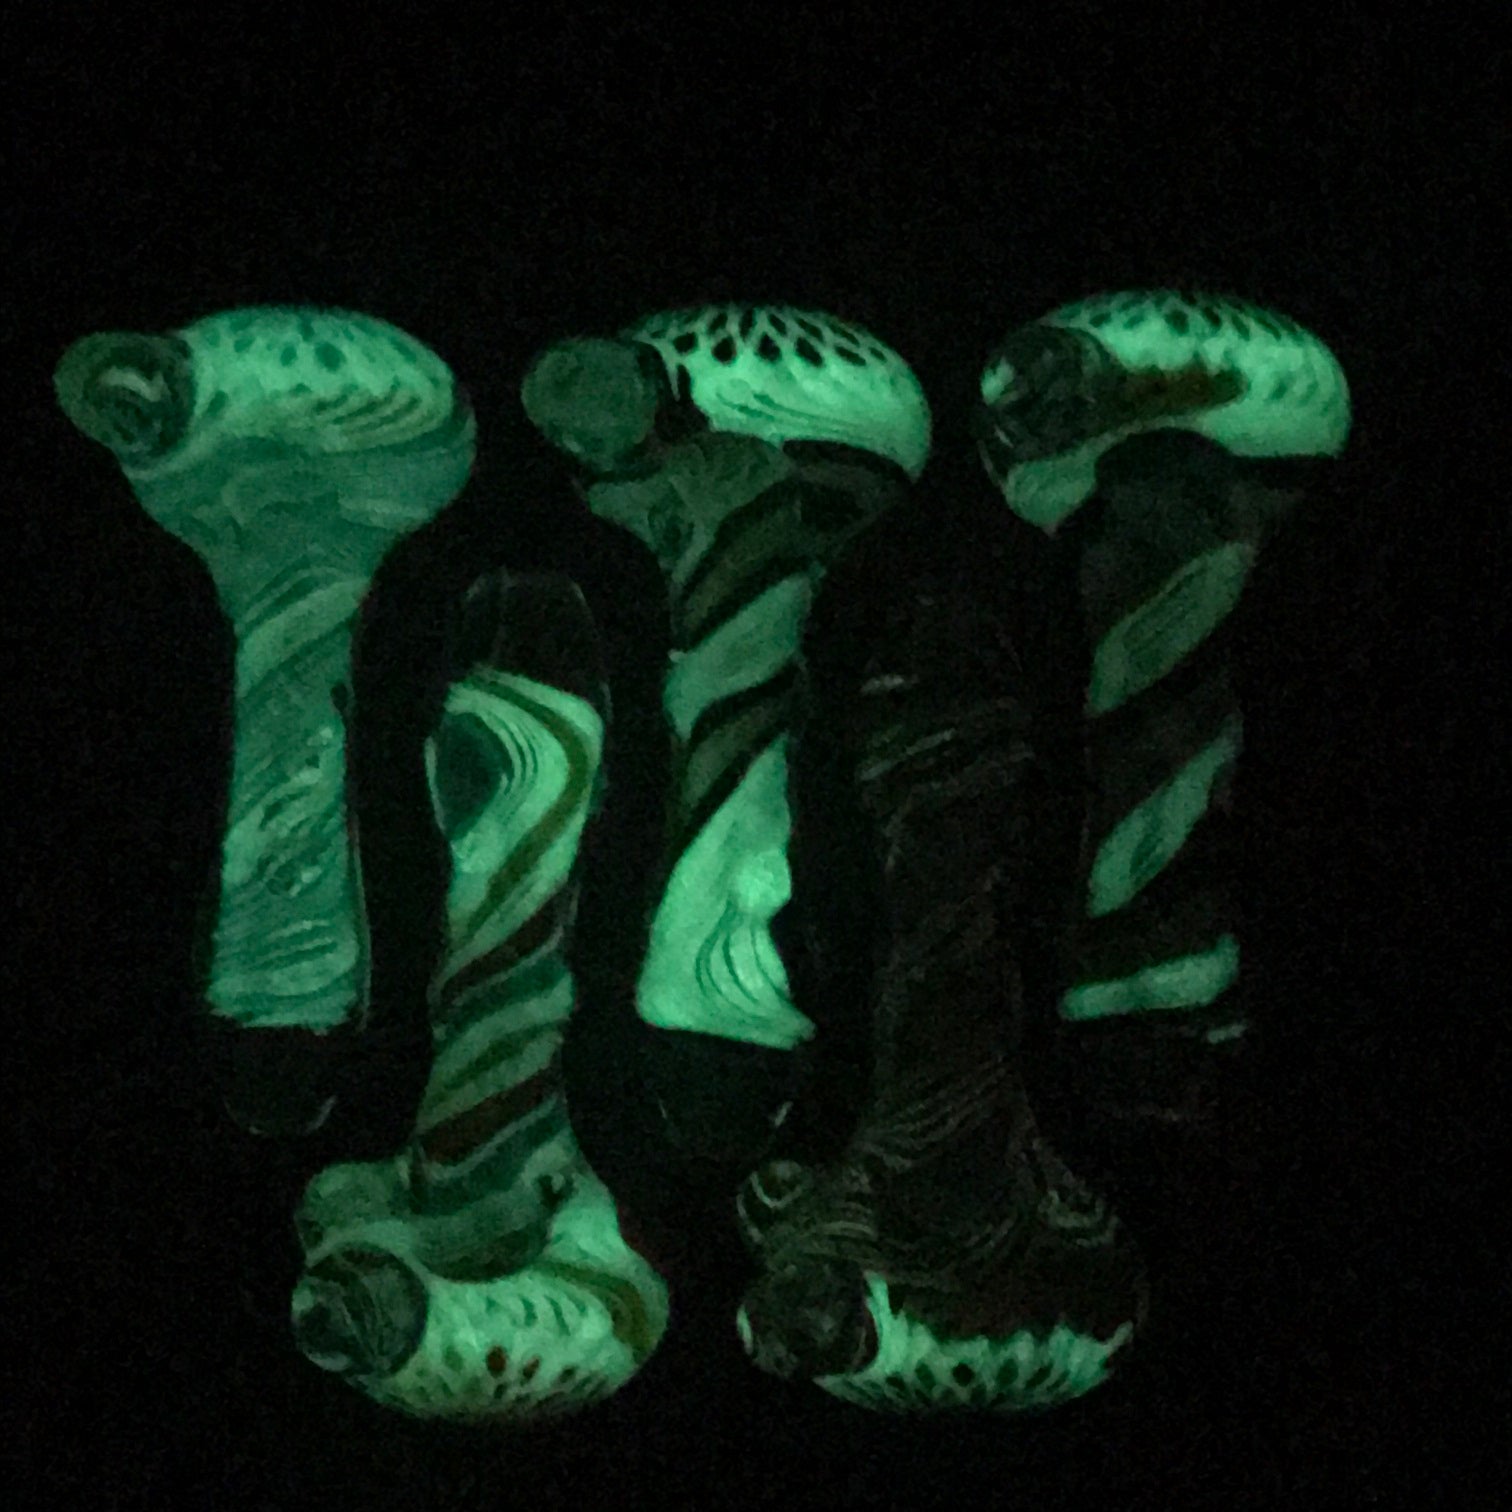 Rotational Science Glass Glow in the Dark Twist Lines Pipe